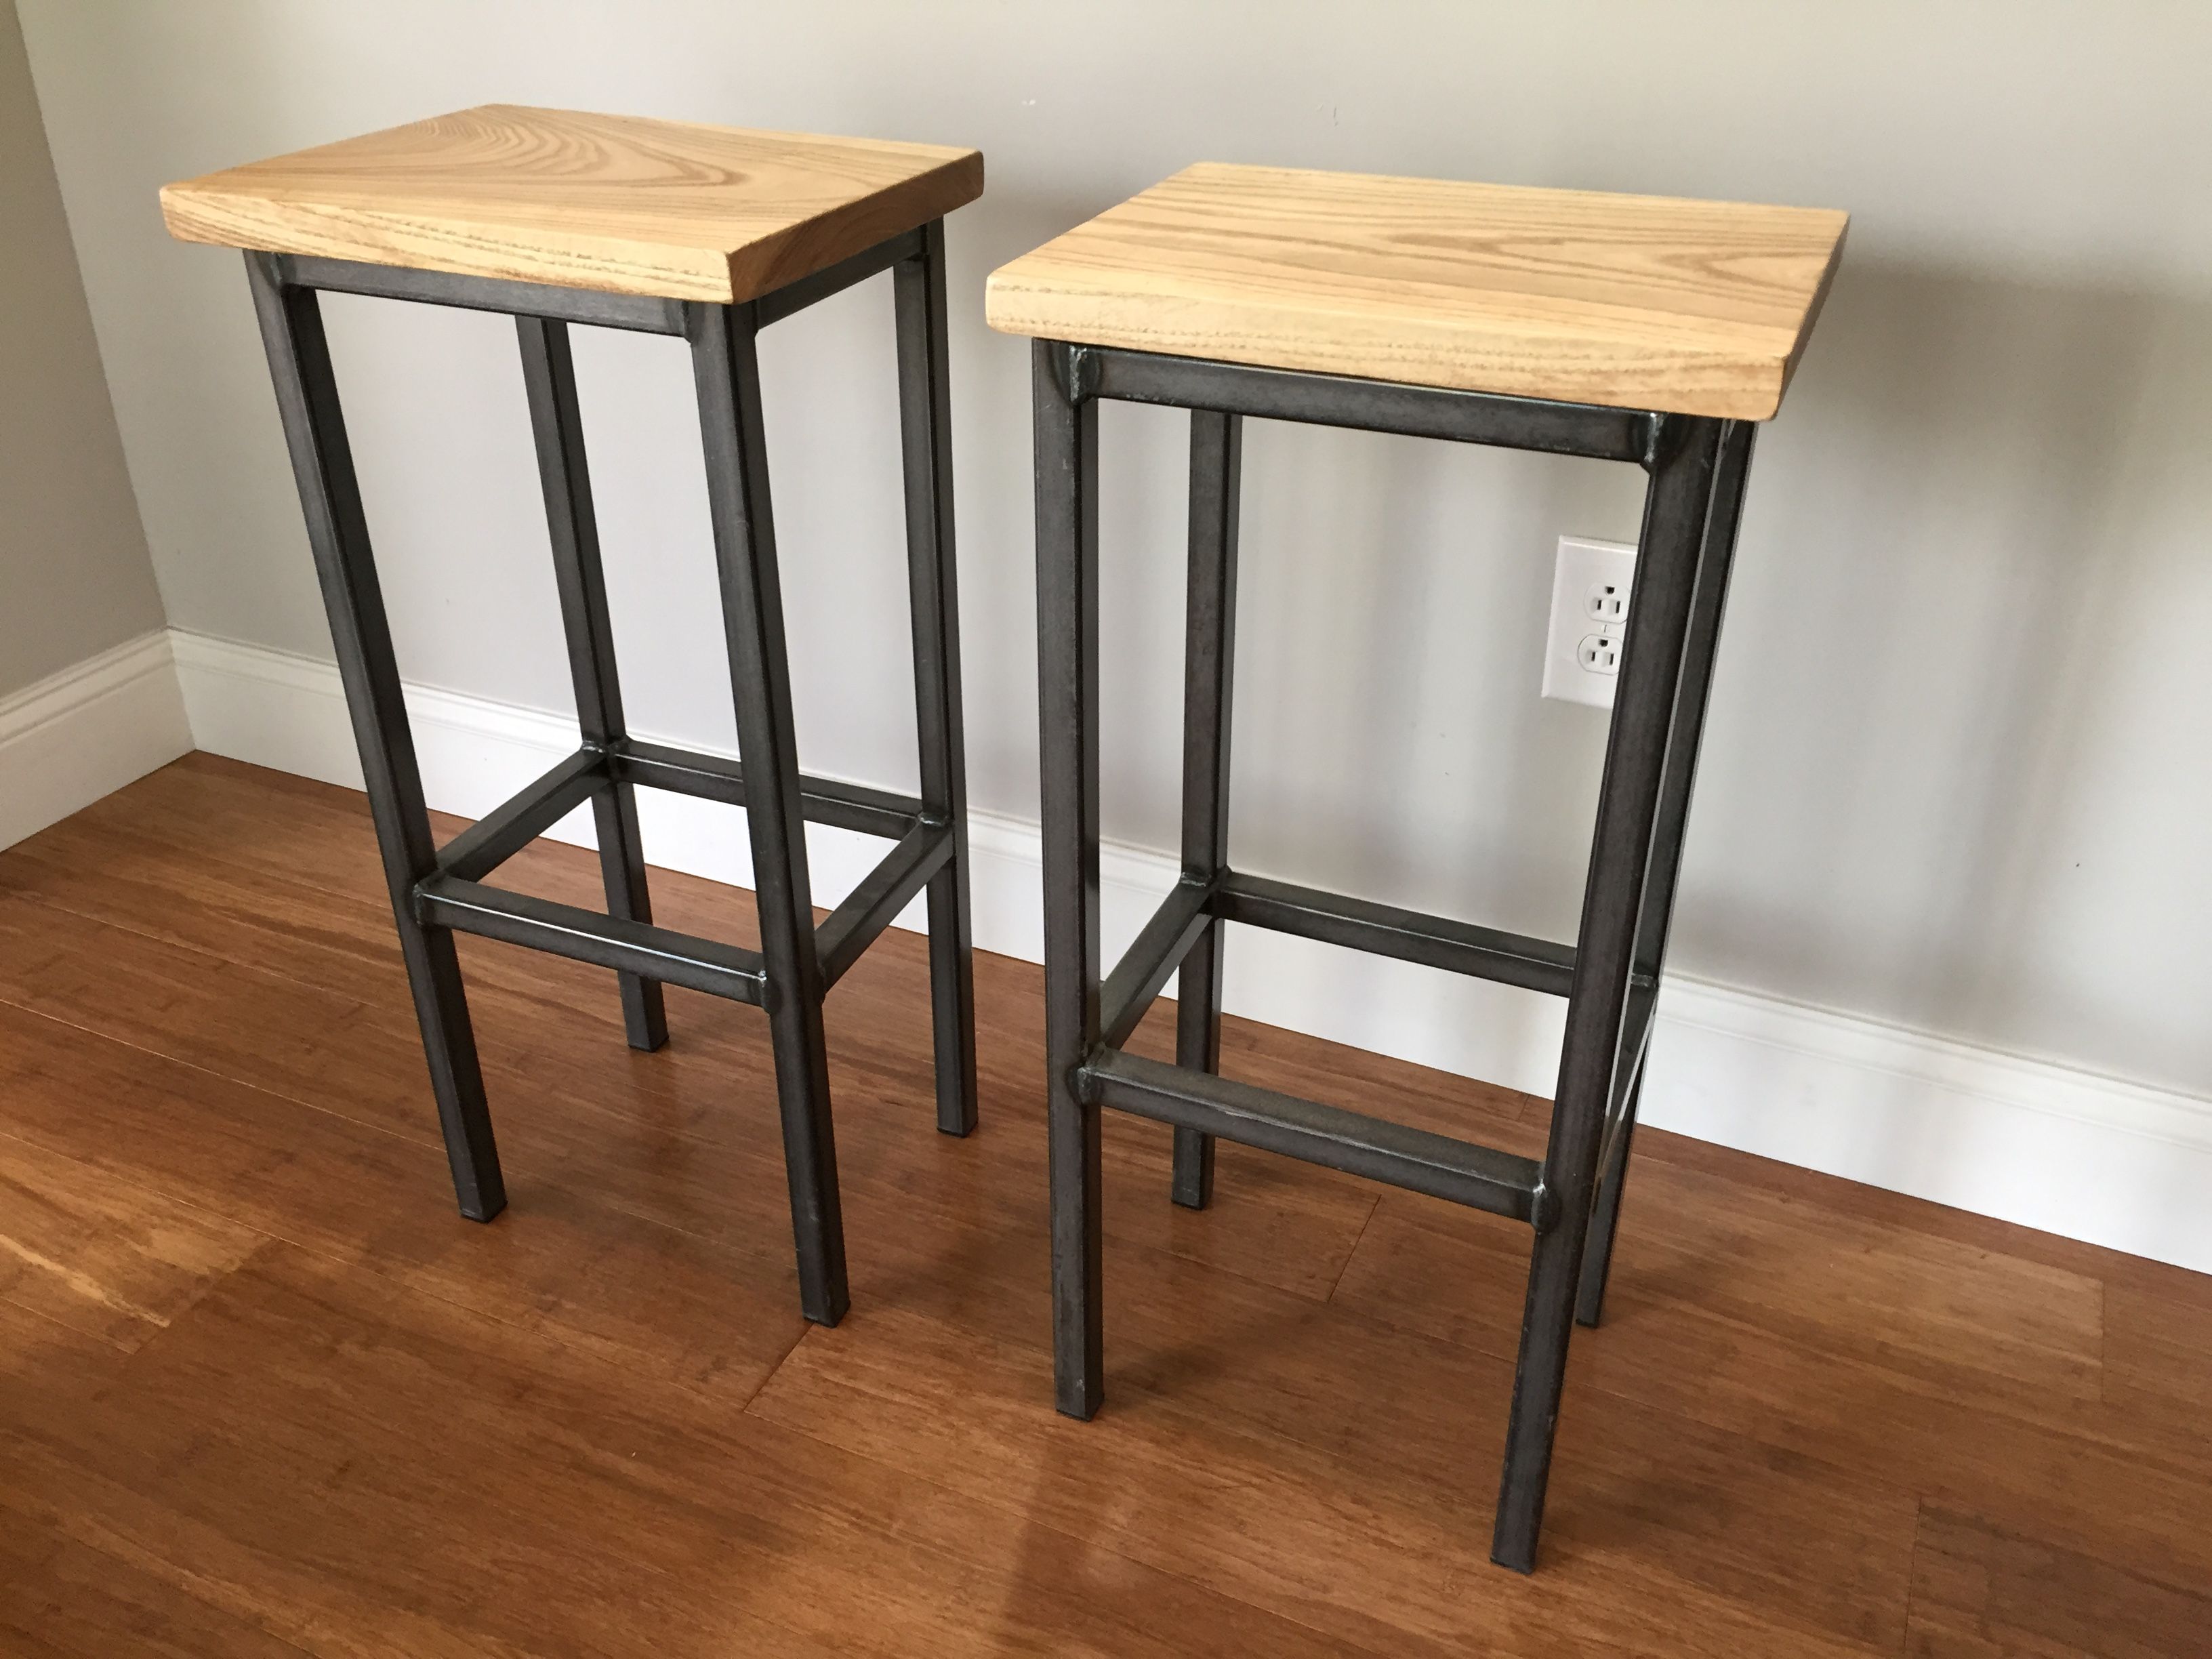 Hand Crafted Black Ash Wood Bar Stools W/Steel Frame - Handmade In ...